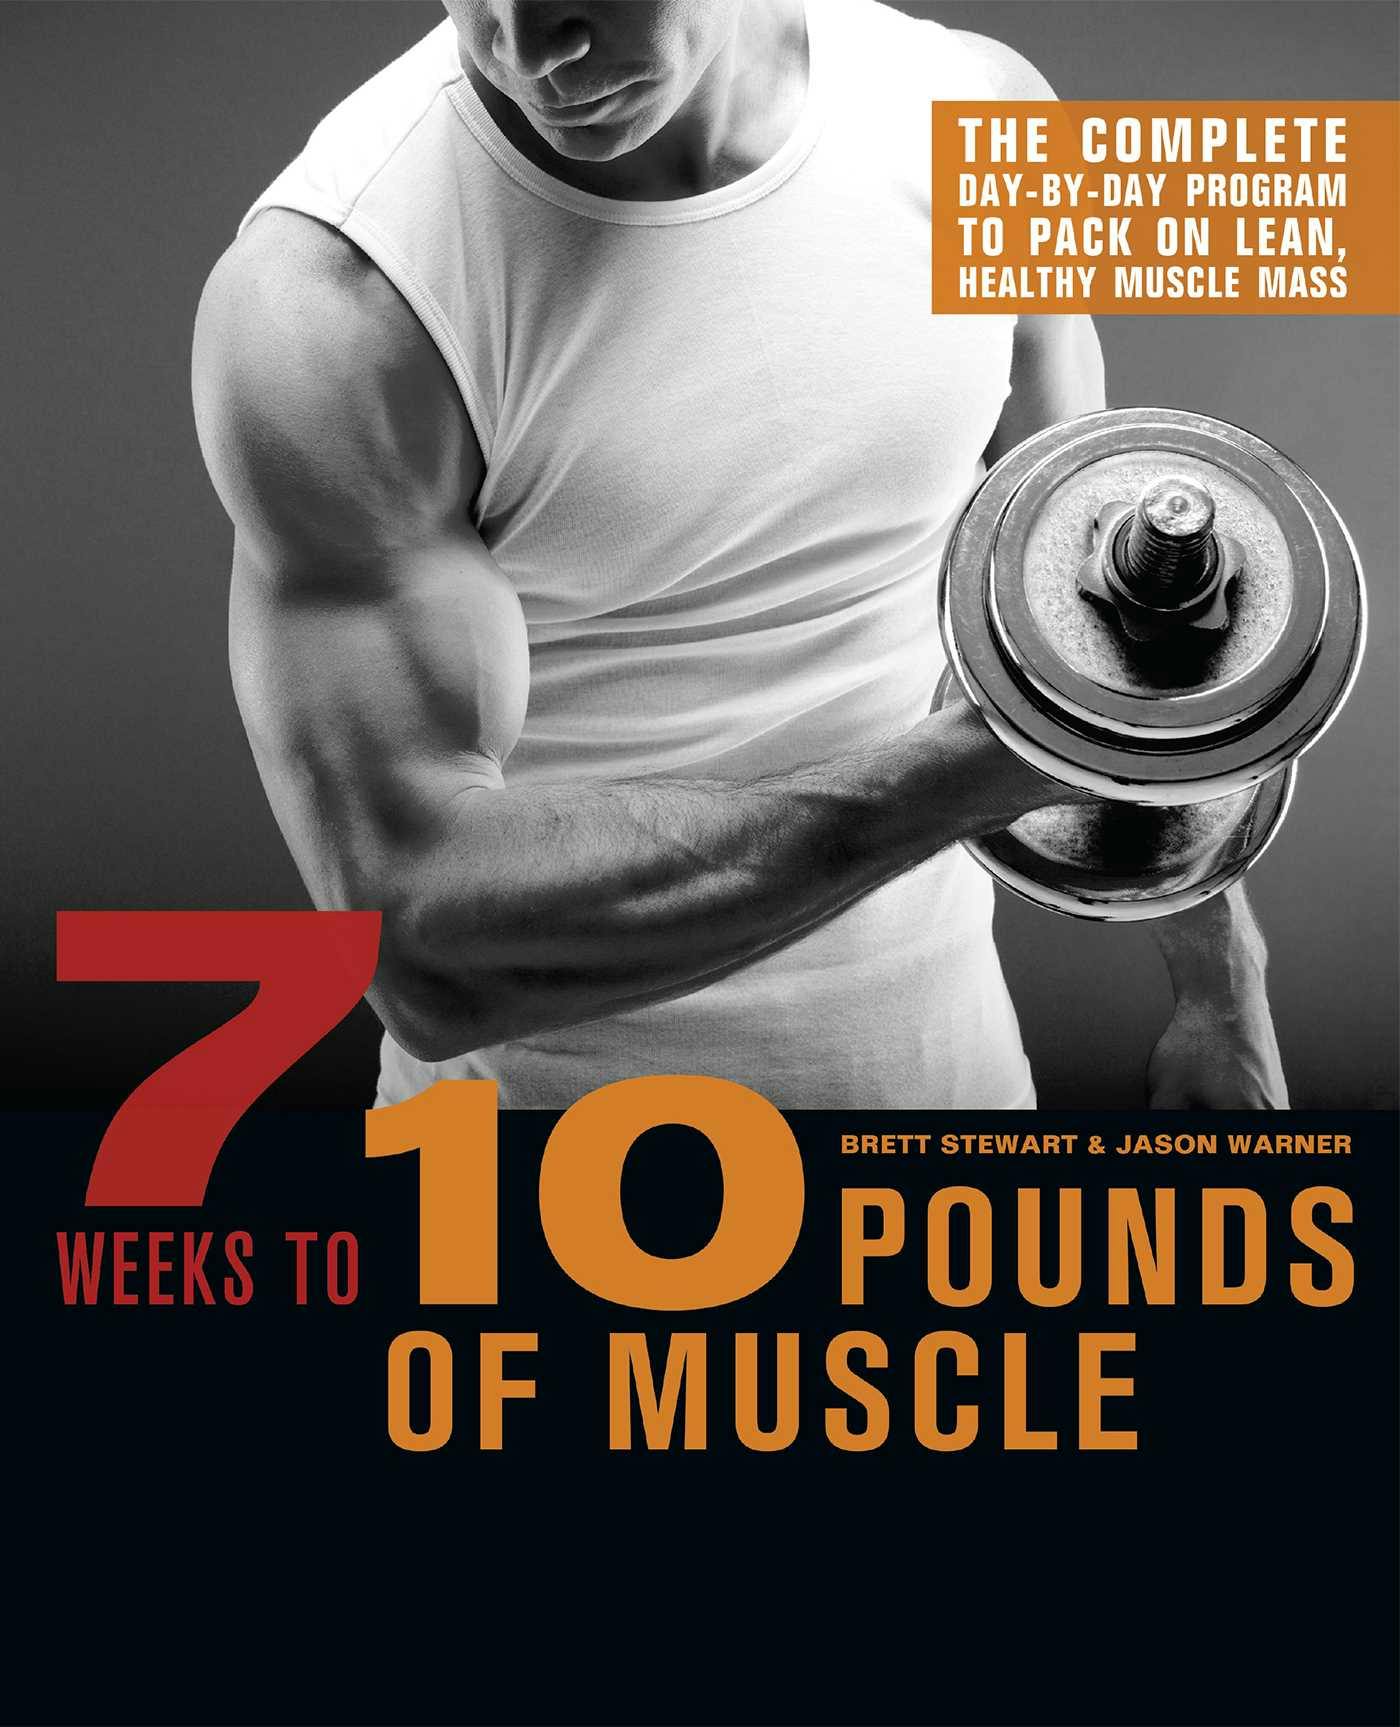 7 Weeks to 10 Pounds of Muscle: The Complete Day-by-Day Program to Pack on Lean, Healthy Muscle Mass - Brett Stewart, Jason Warner